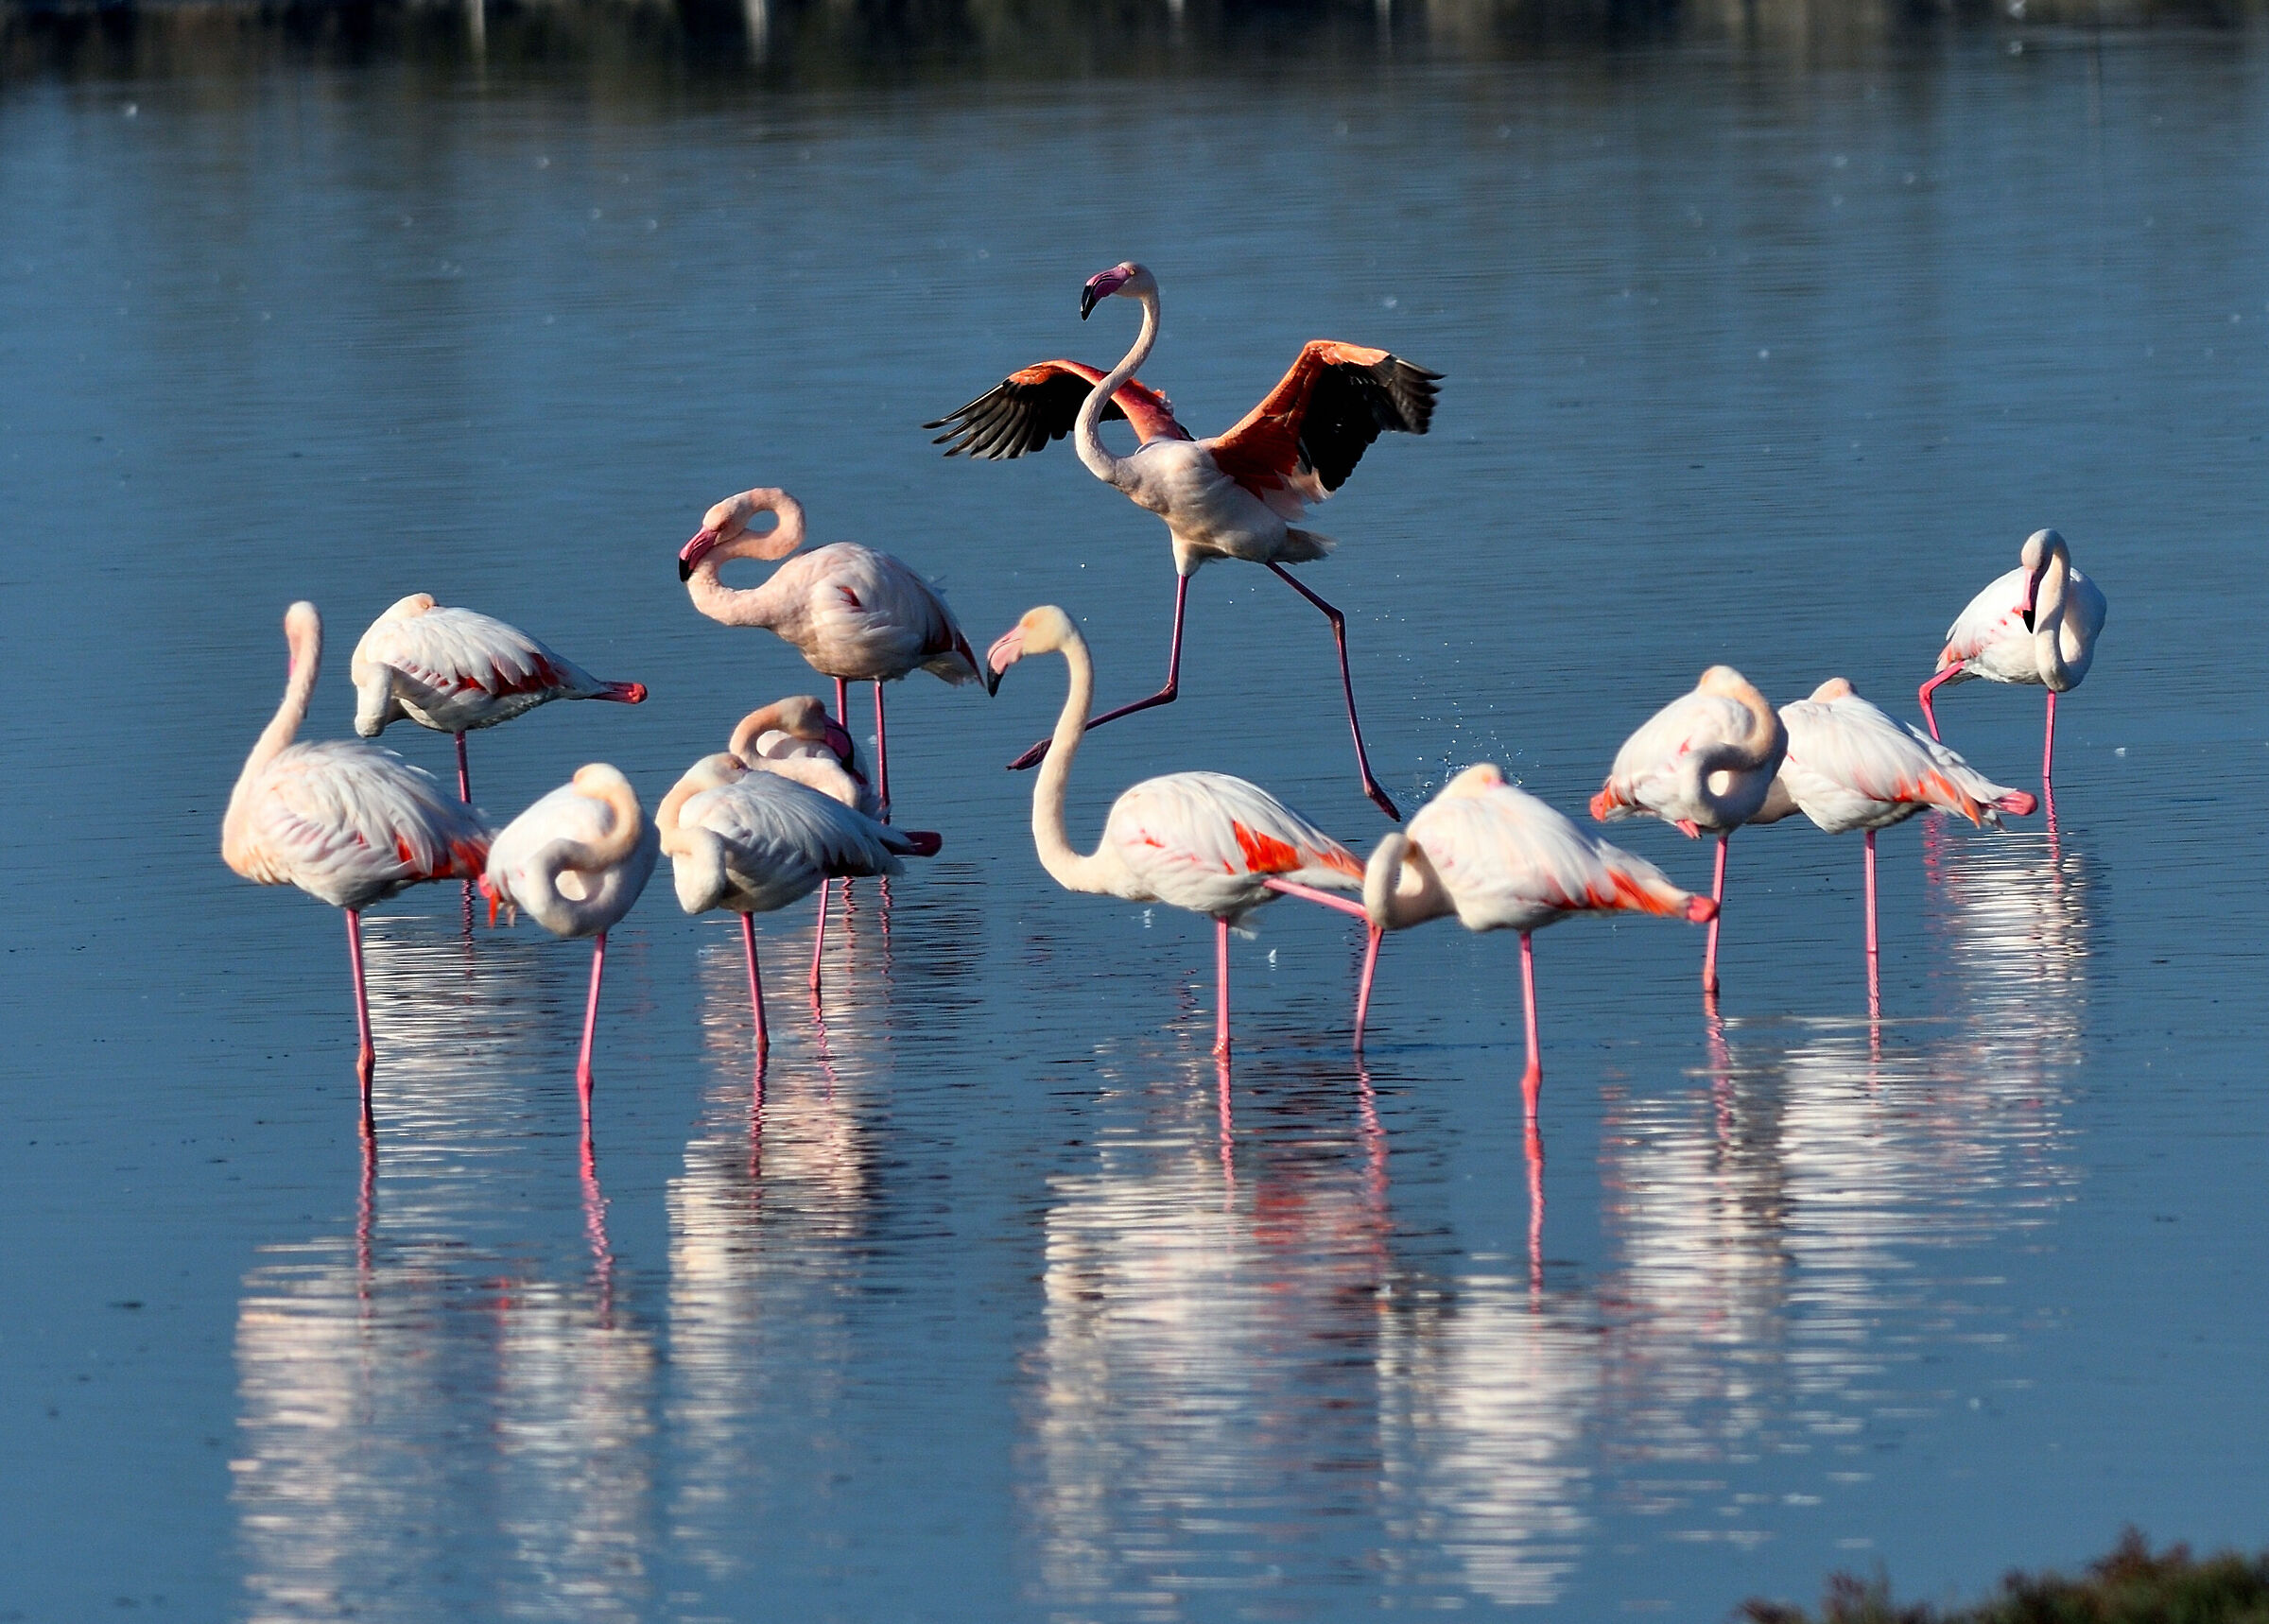 The dance of the flamingo...